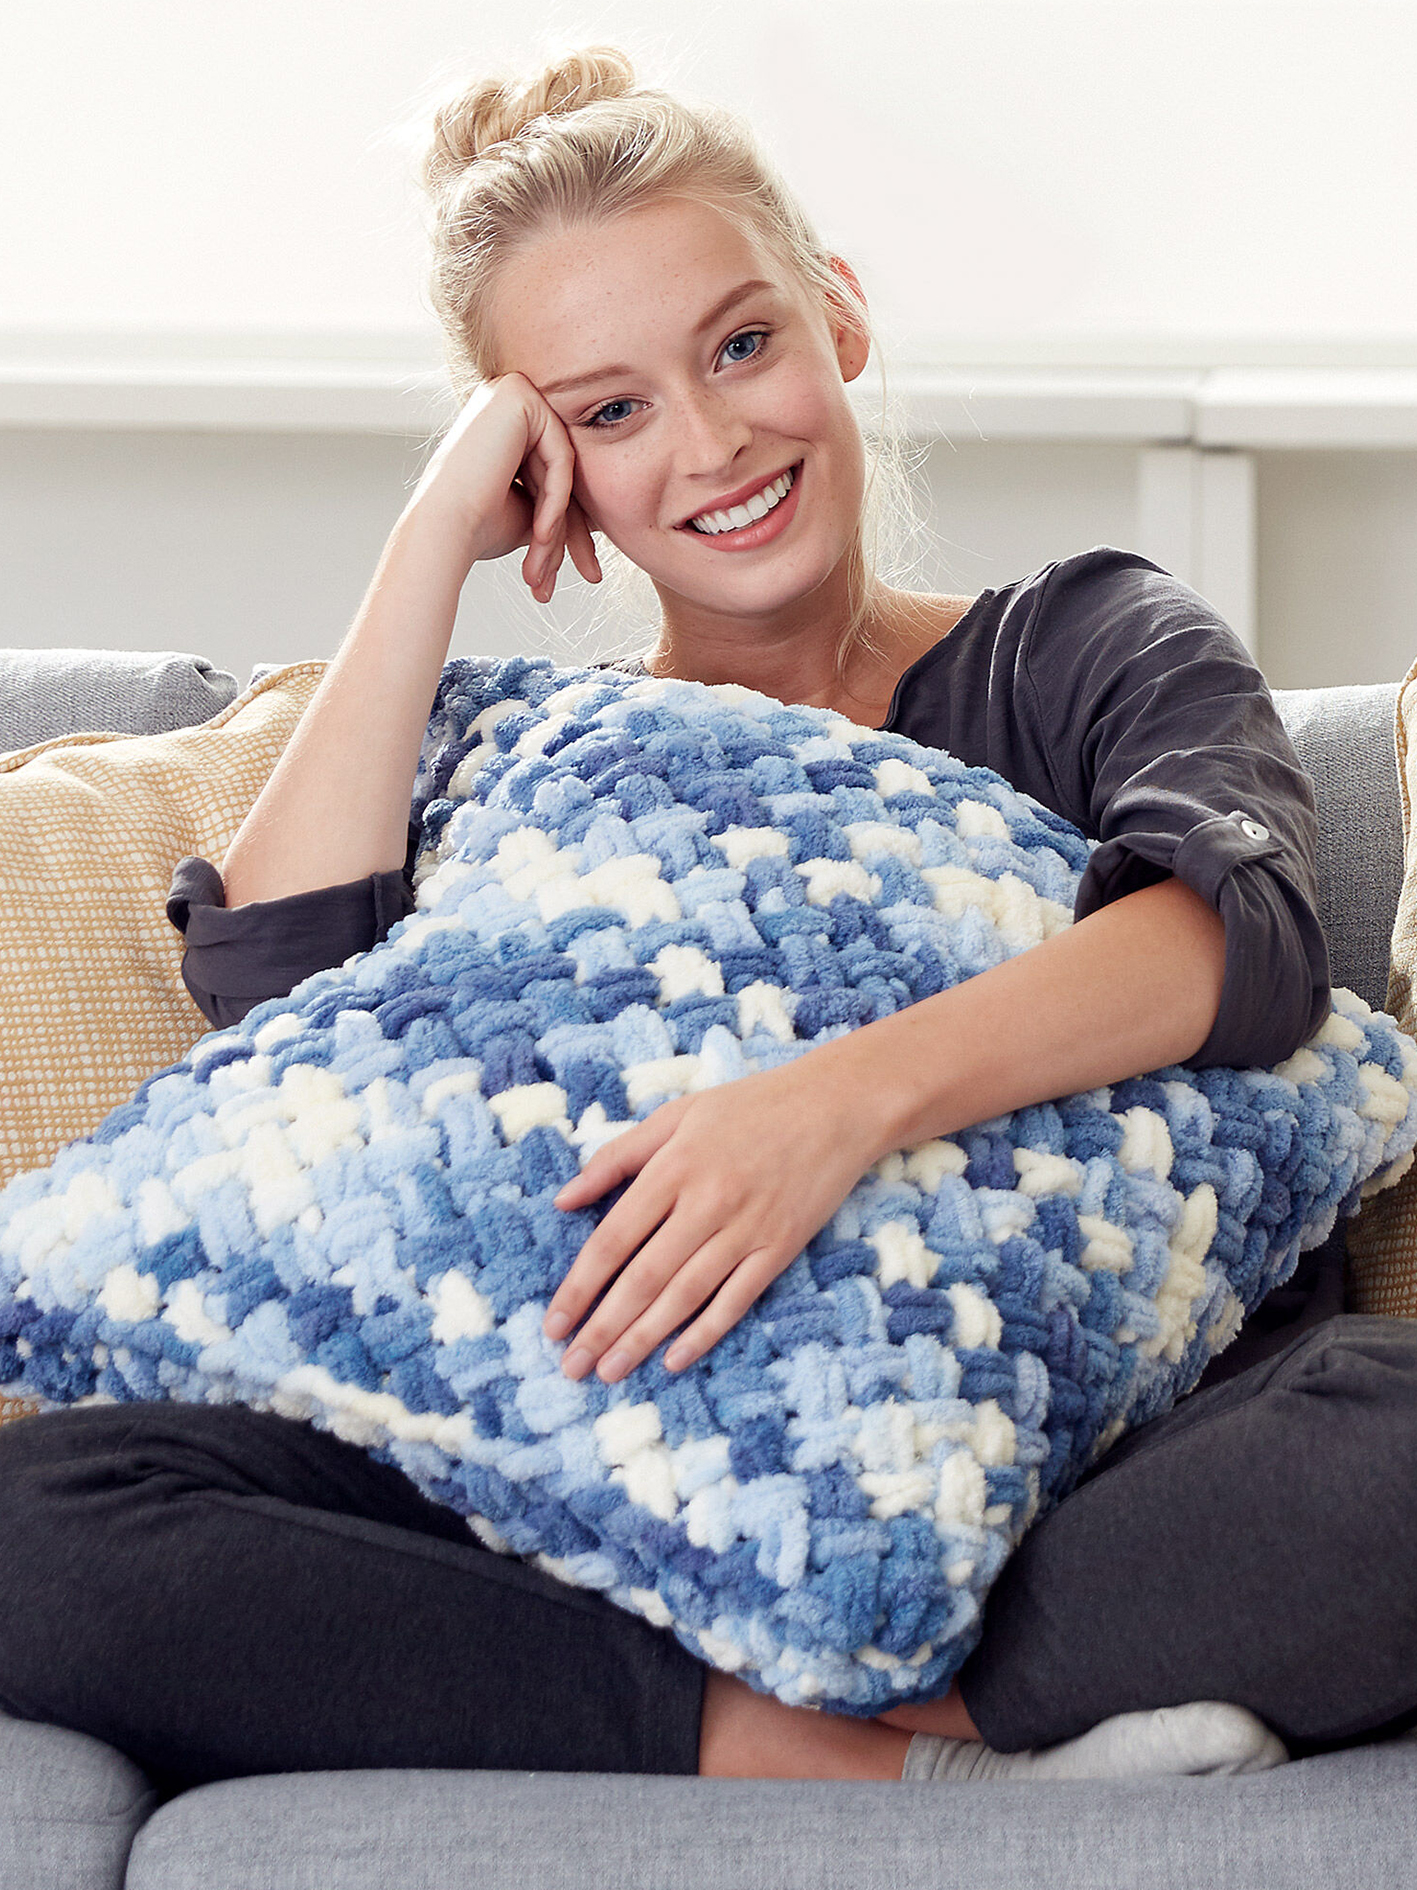 crochet-pillow-you-want-to-make-your-house-so-elegant-30-new-decor-crochet-pillow-ideas-new-2019